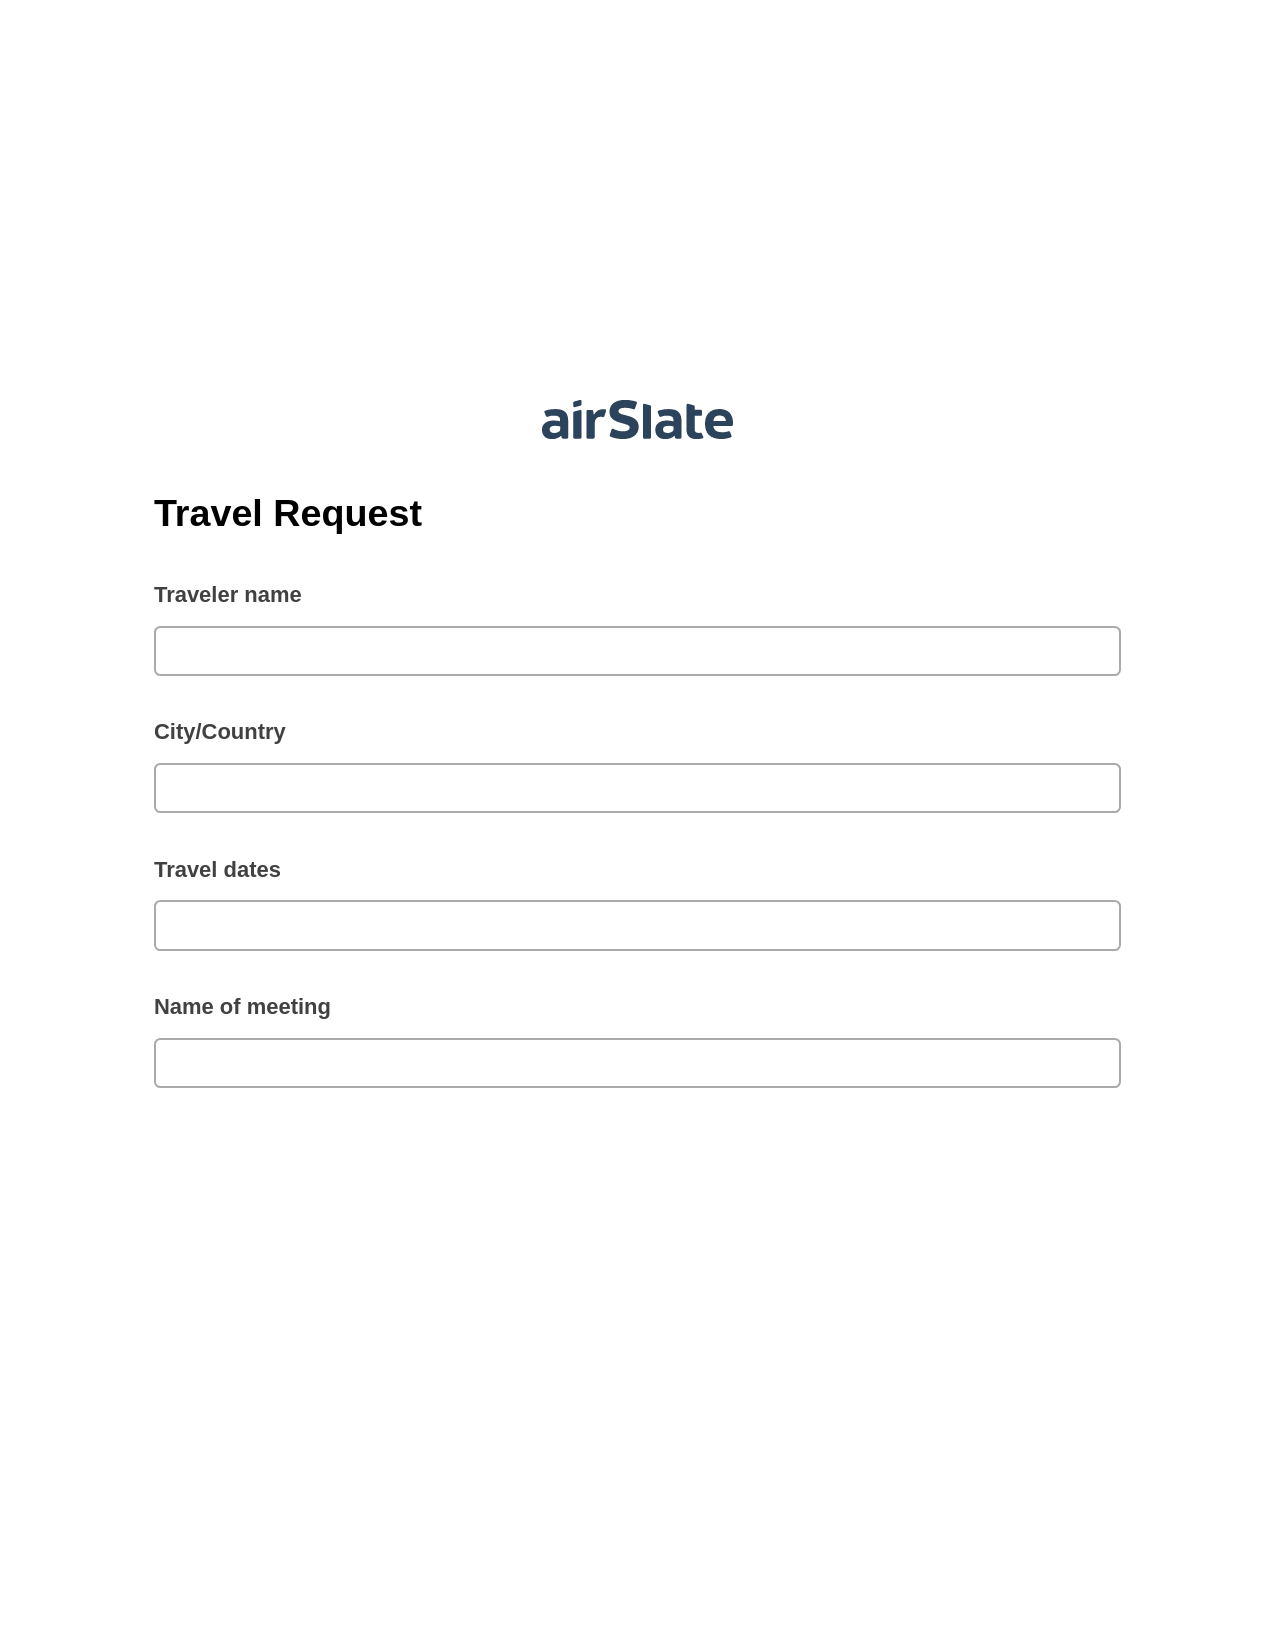 Multirole Travel Request Pre-fill from CSV File Bot, Send Mailchimp Campaign Bot, Archive to SharePoint Folder Bot